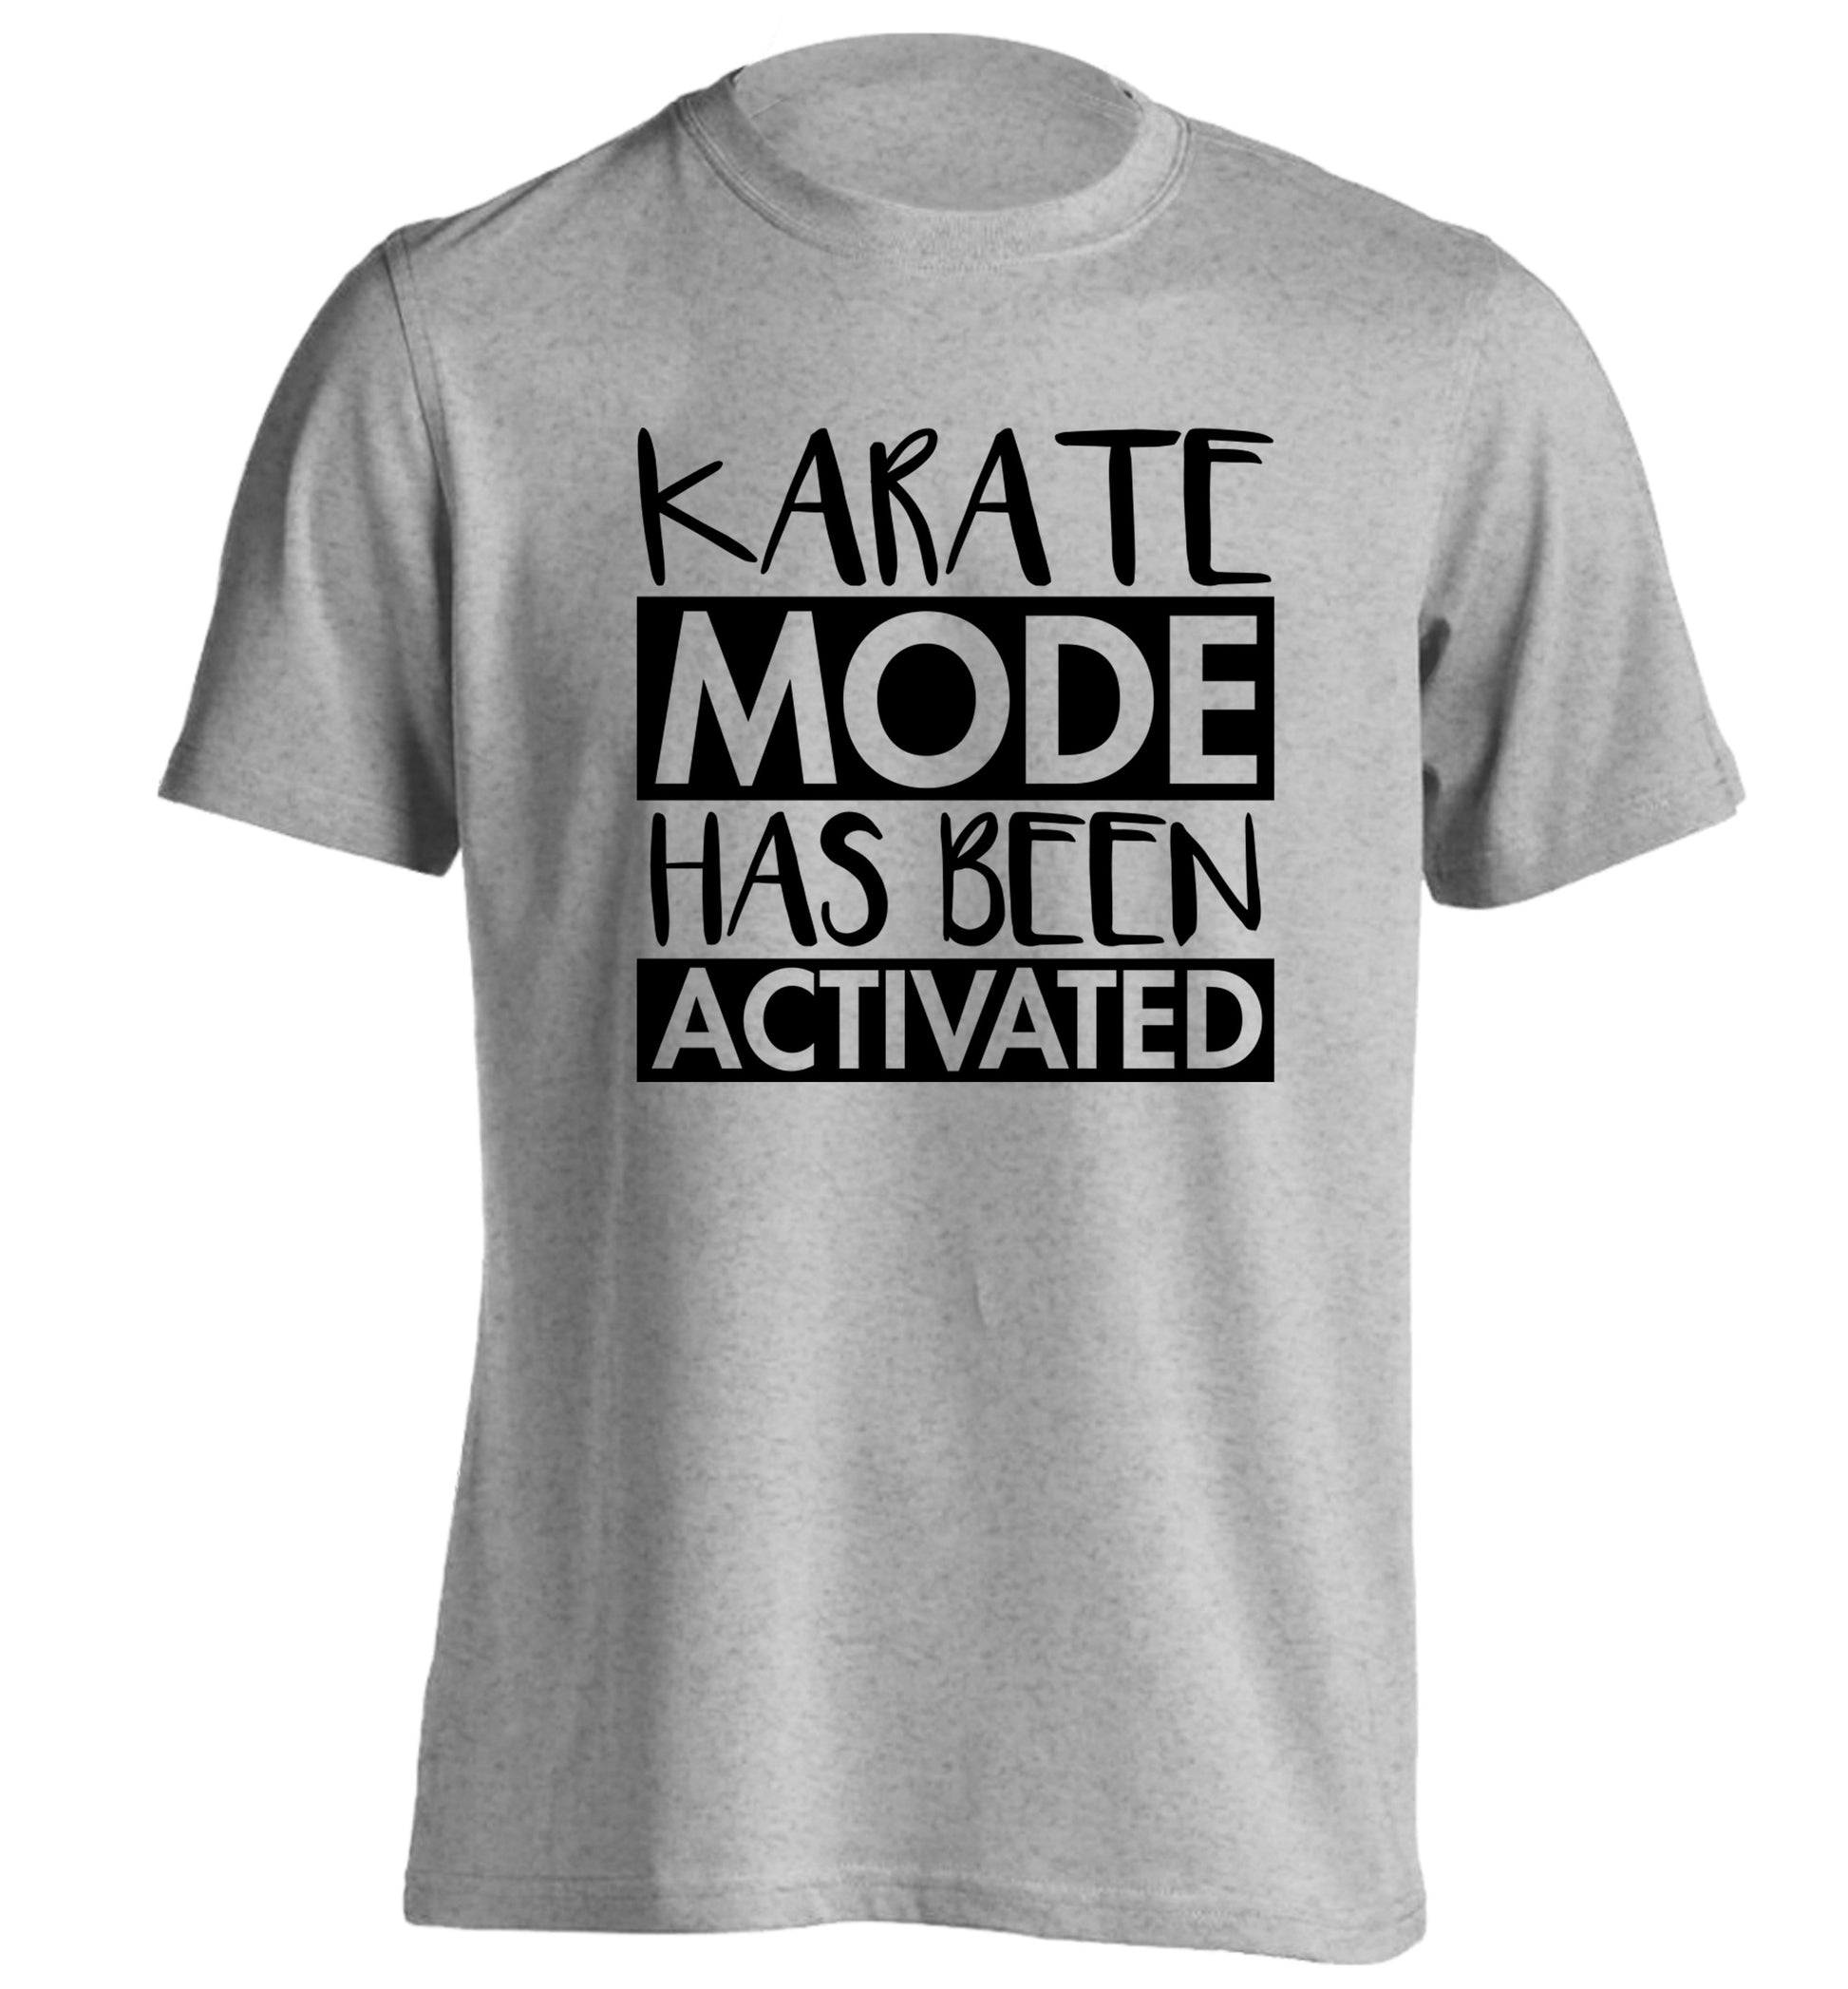 Karate mode activated adults unisex grey Tshirt 2XL